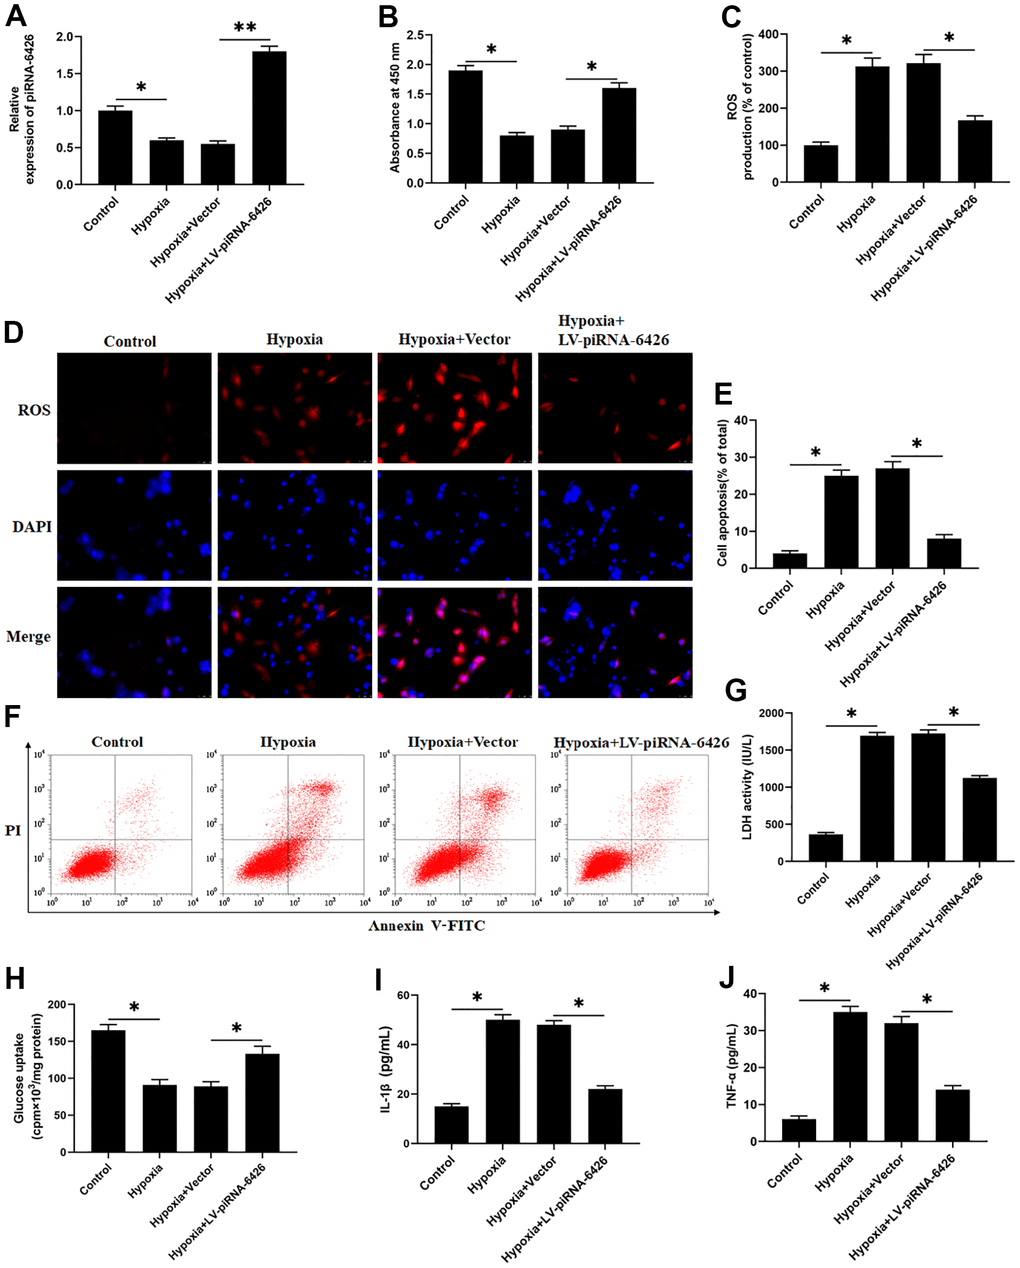 Overexpression of piRNA-6426 alleviates hypoxia-induced dysfunction of rat cardiomyocytes. The isolated and cultured rat cardiomyocytes were induced in a hypoxic incubator for 24 hours to establish a HF cell model after 24 h of per-incubated with 25 nM piRNA-6426 overexpression vector. (A) The expression of piRNA-6426 in each group were detected by using RT-qPCR. (B) MTT assay was used to identify cell viability. (C, D) The production of reactive oxygen species (ROS) was analyzed with DCFH-DA. (E, F) Flow cytometry was used to detect cell apoptosis. (G) The lactate dehydrogenase (LDH) activity was detected. (H) D-(2-3H)-glucose uptake assay was used to perform glucose uptake on fully fused rat cardiomyocytes. (I, J) ELISA kits were used to detect the secretion of inflammatory cytokines IL-1β and TNF-α. Values were expressed as mean ± SEM. *PP